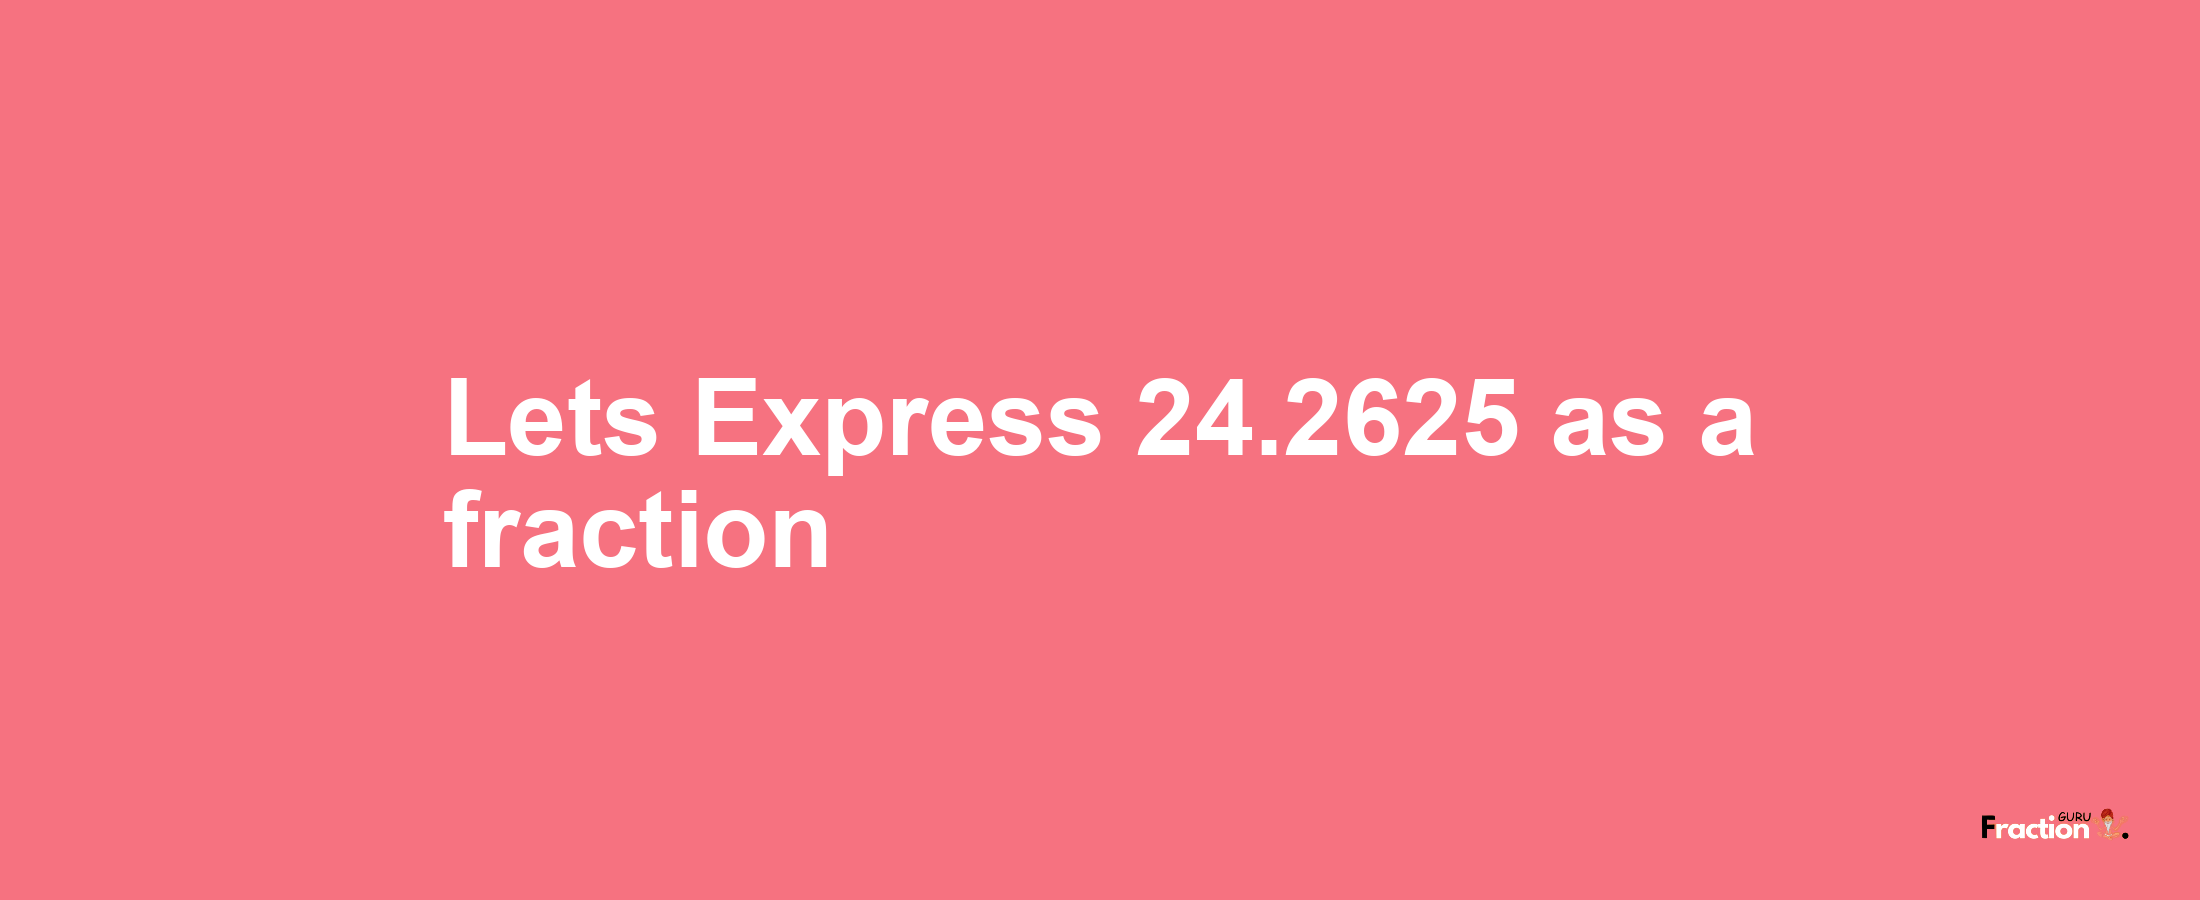 Lets Express 24.2625 as afraction